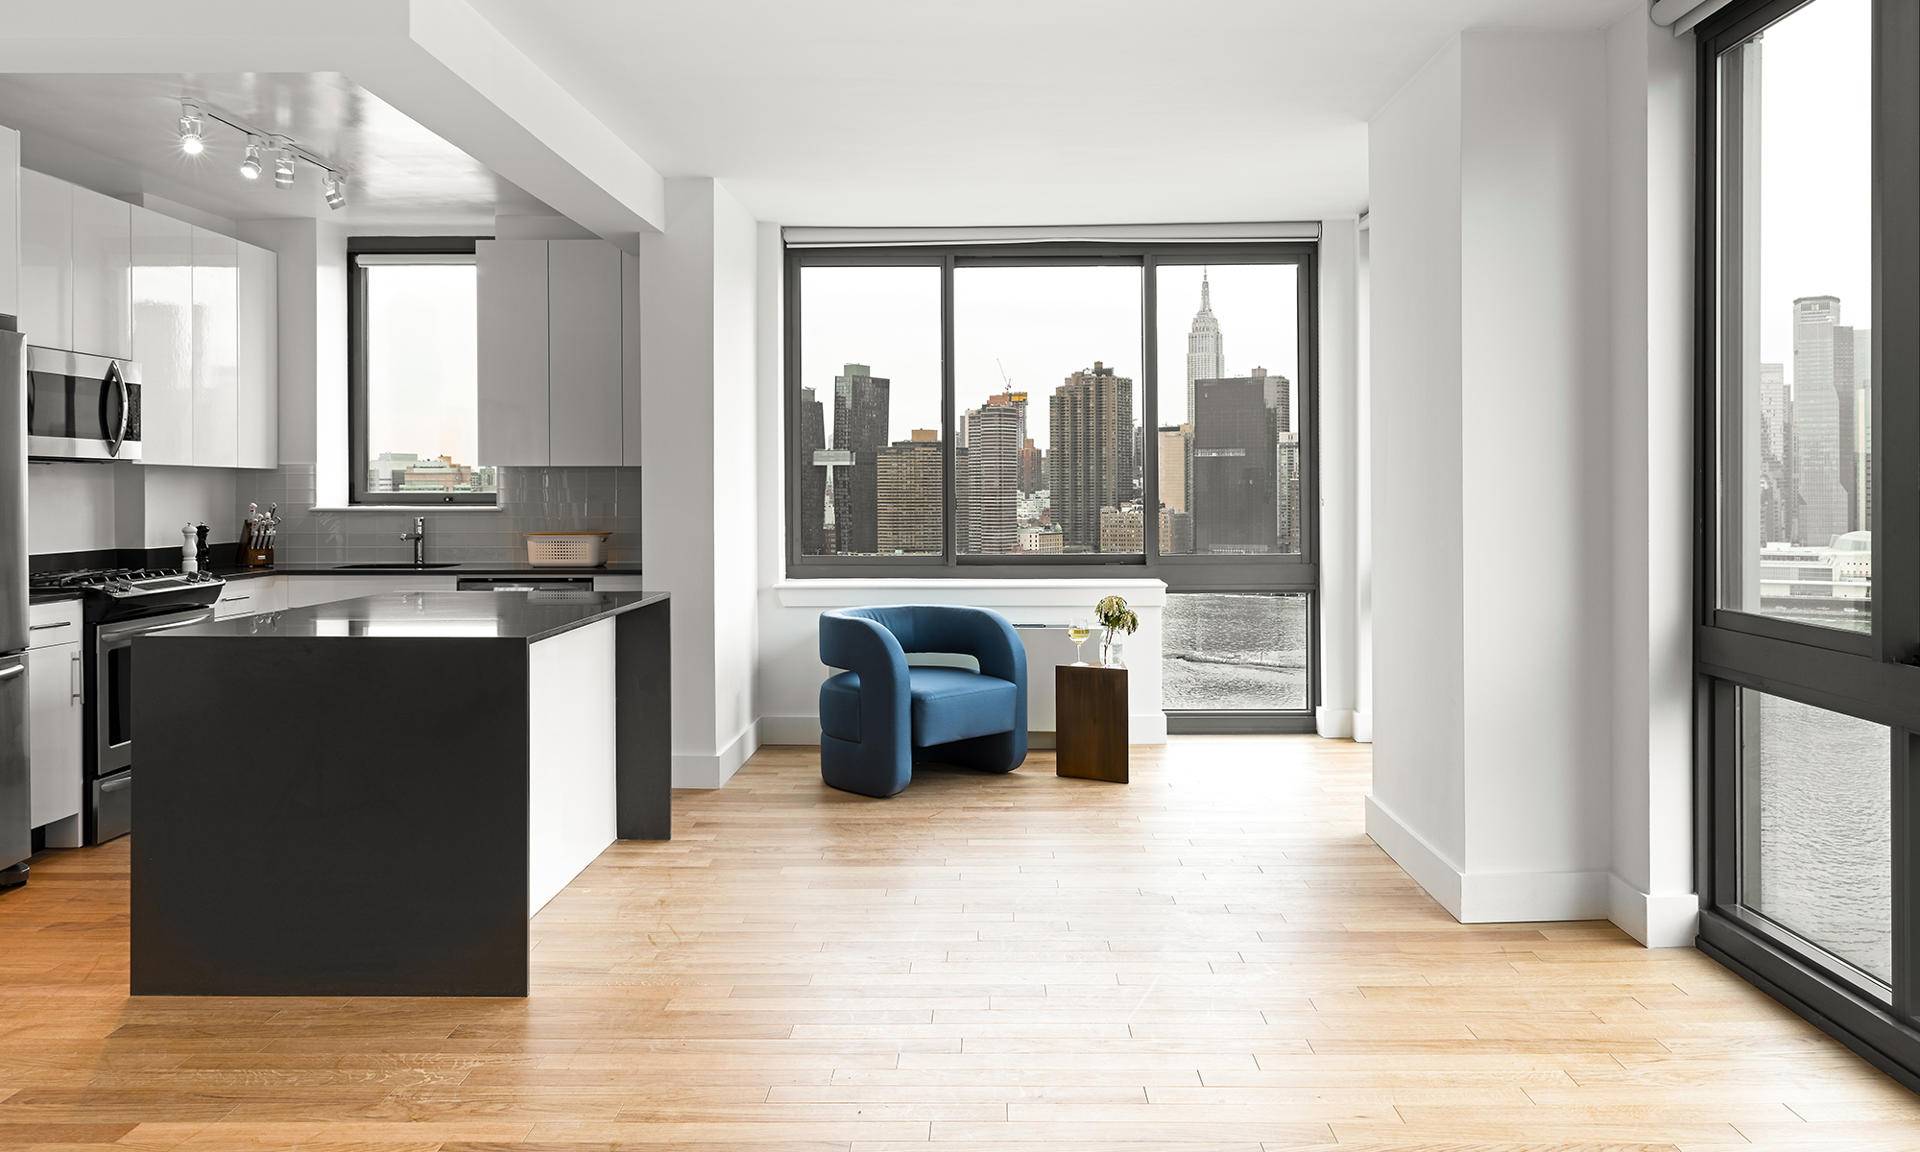 LIC Spacious, Fully Renovated 1 Bed with a Magnificent Open Kitchen, a Large Corner Living/Dining Area, a Corner Bedroom and a Private Balcony with Views of Lower Manhattan and the Freedom Tower.